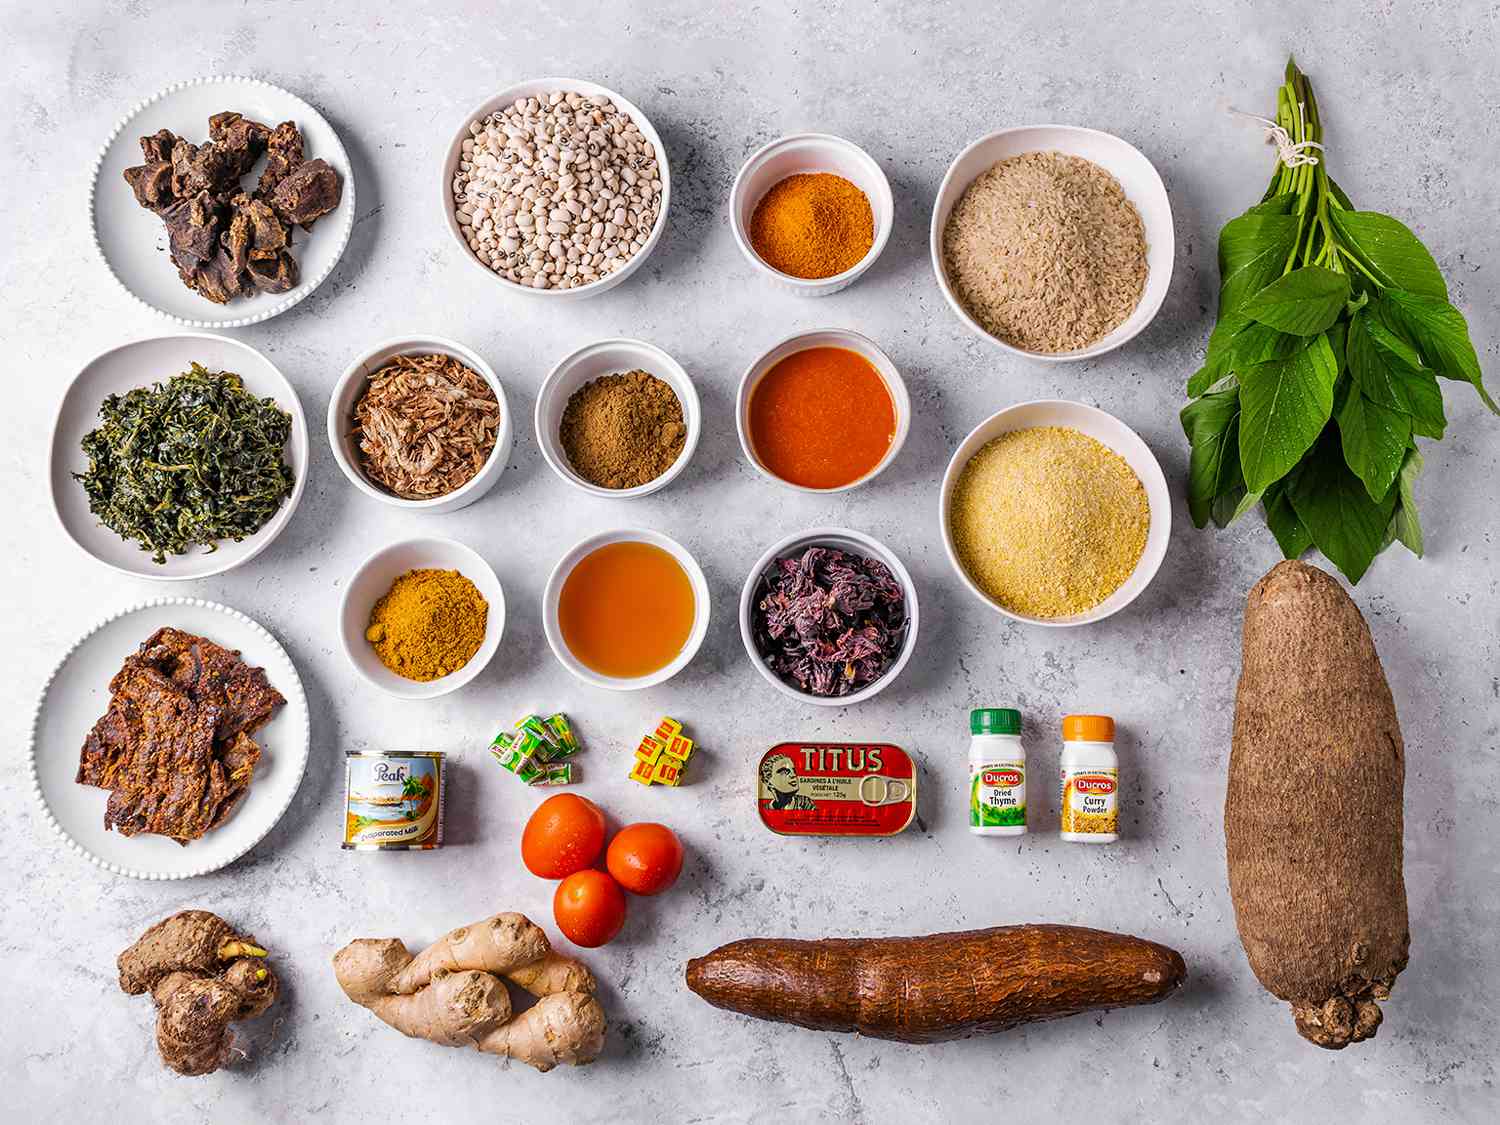 Overhead view of all the essential ingredients needed in a pantry to cook a range of Nigerian dishes. Ingredients range from spices to roots to tinned food and fresh spices, organized in a neat grid